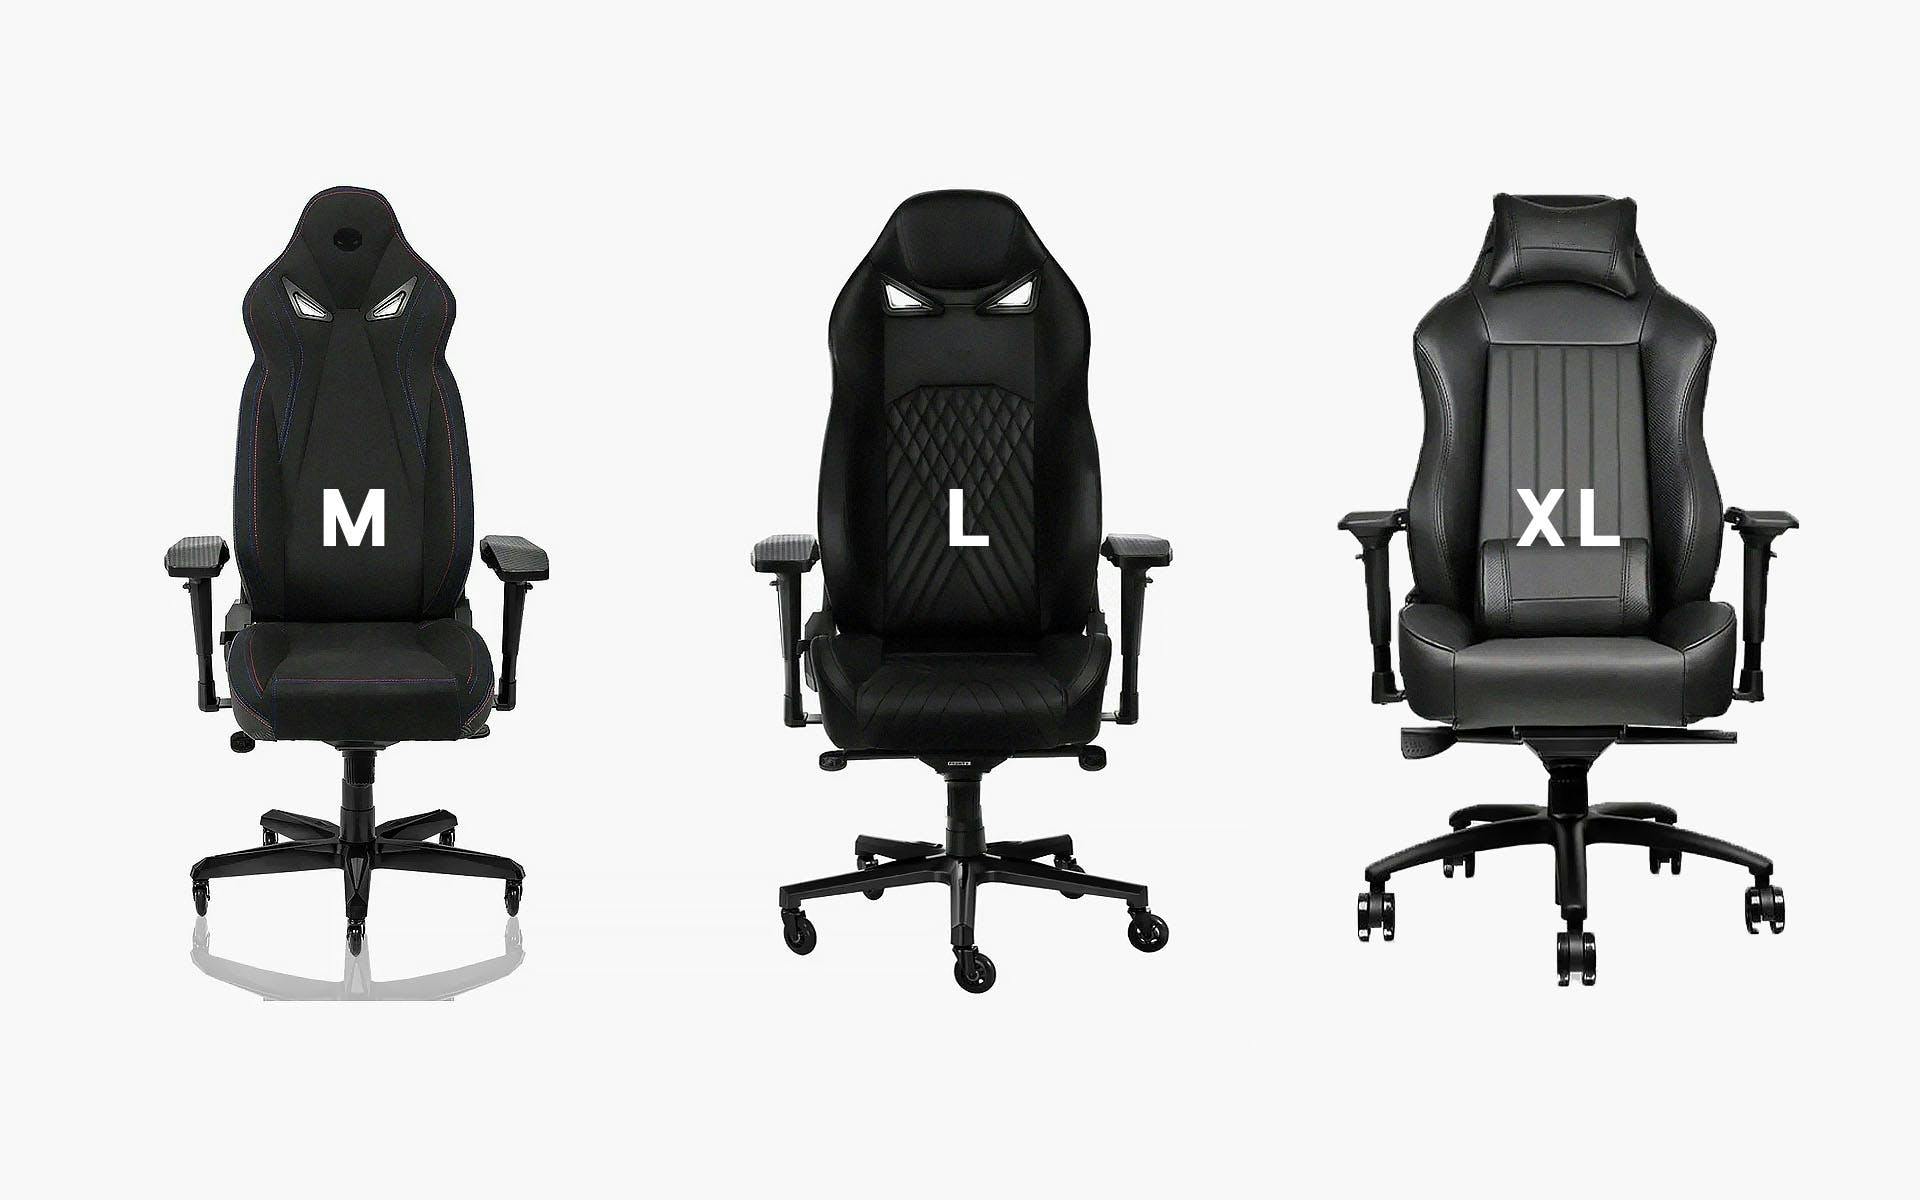 Small gaming chairs to gamer chairs up to 200kg